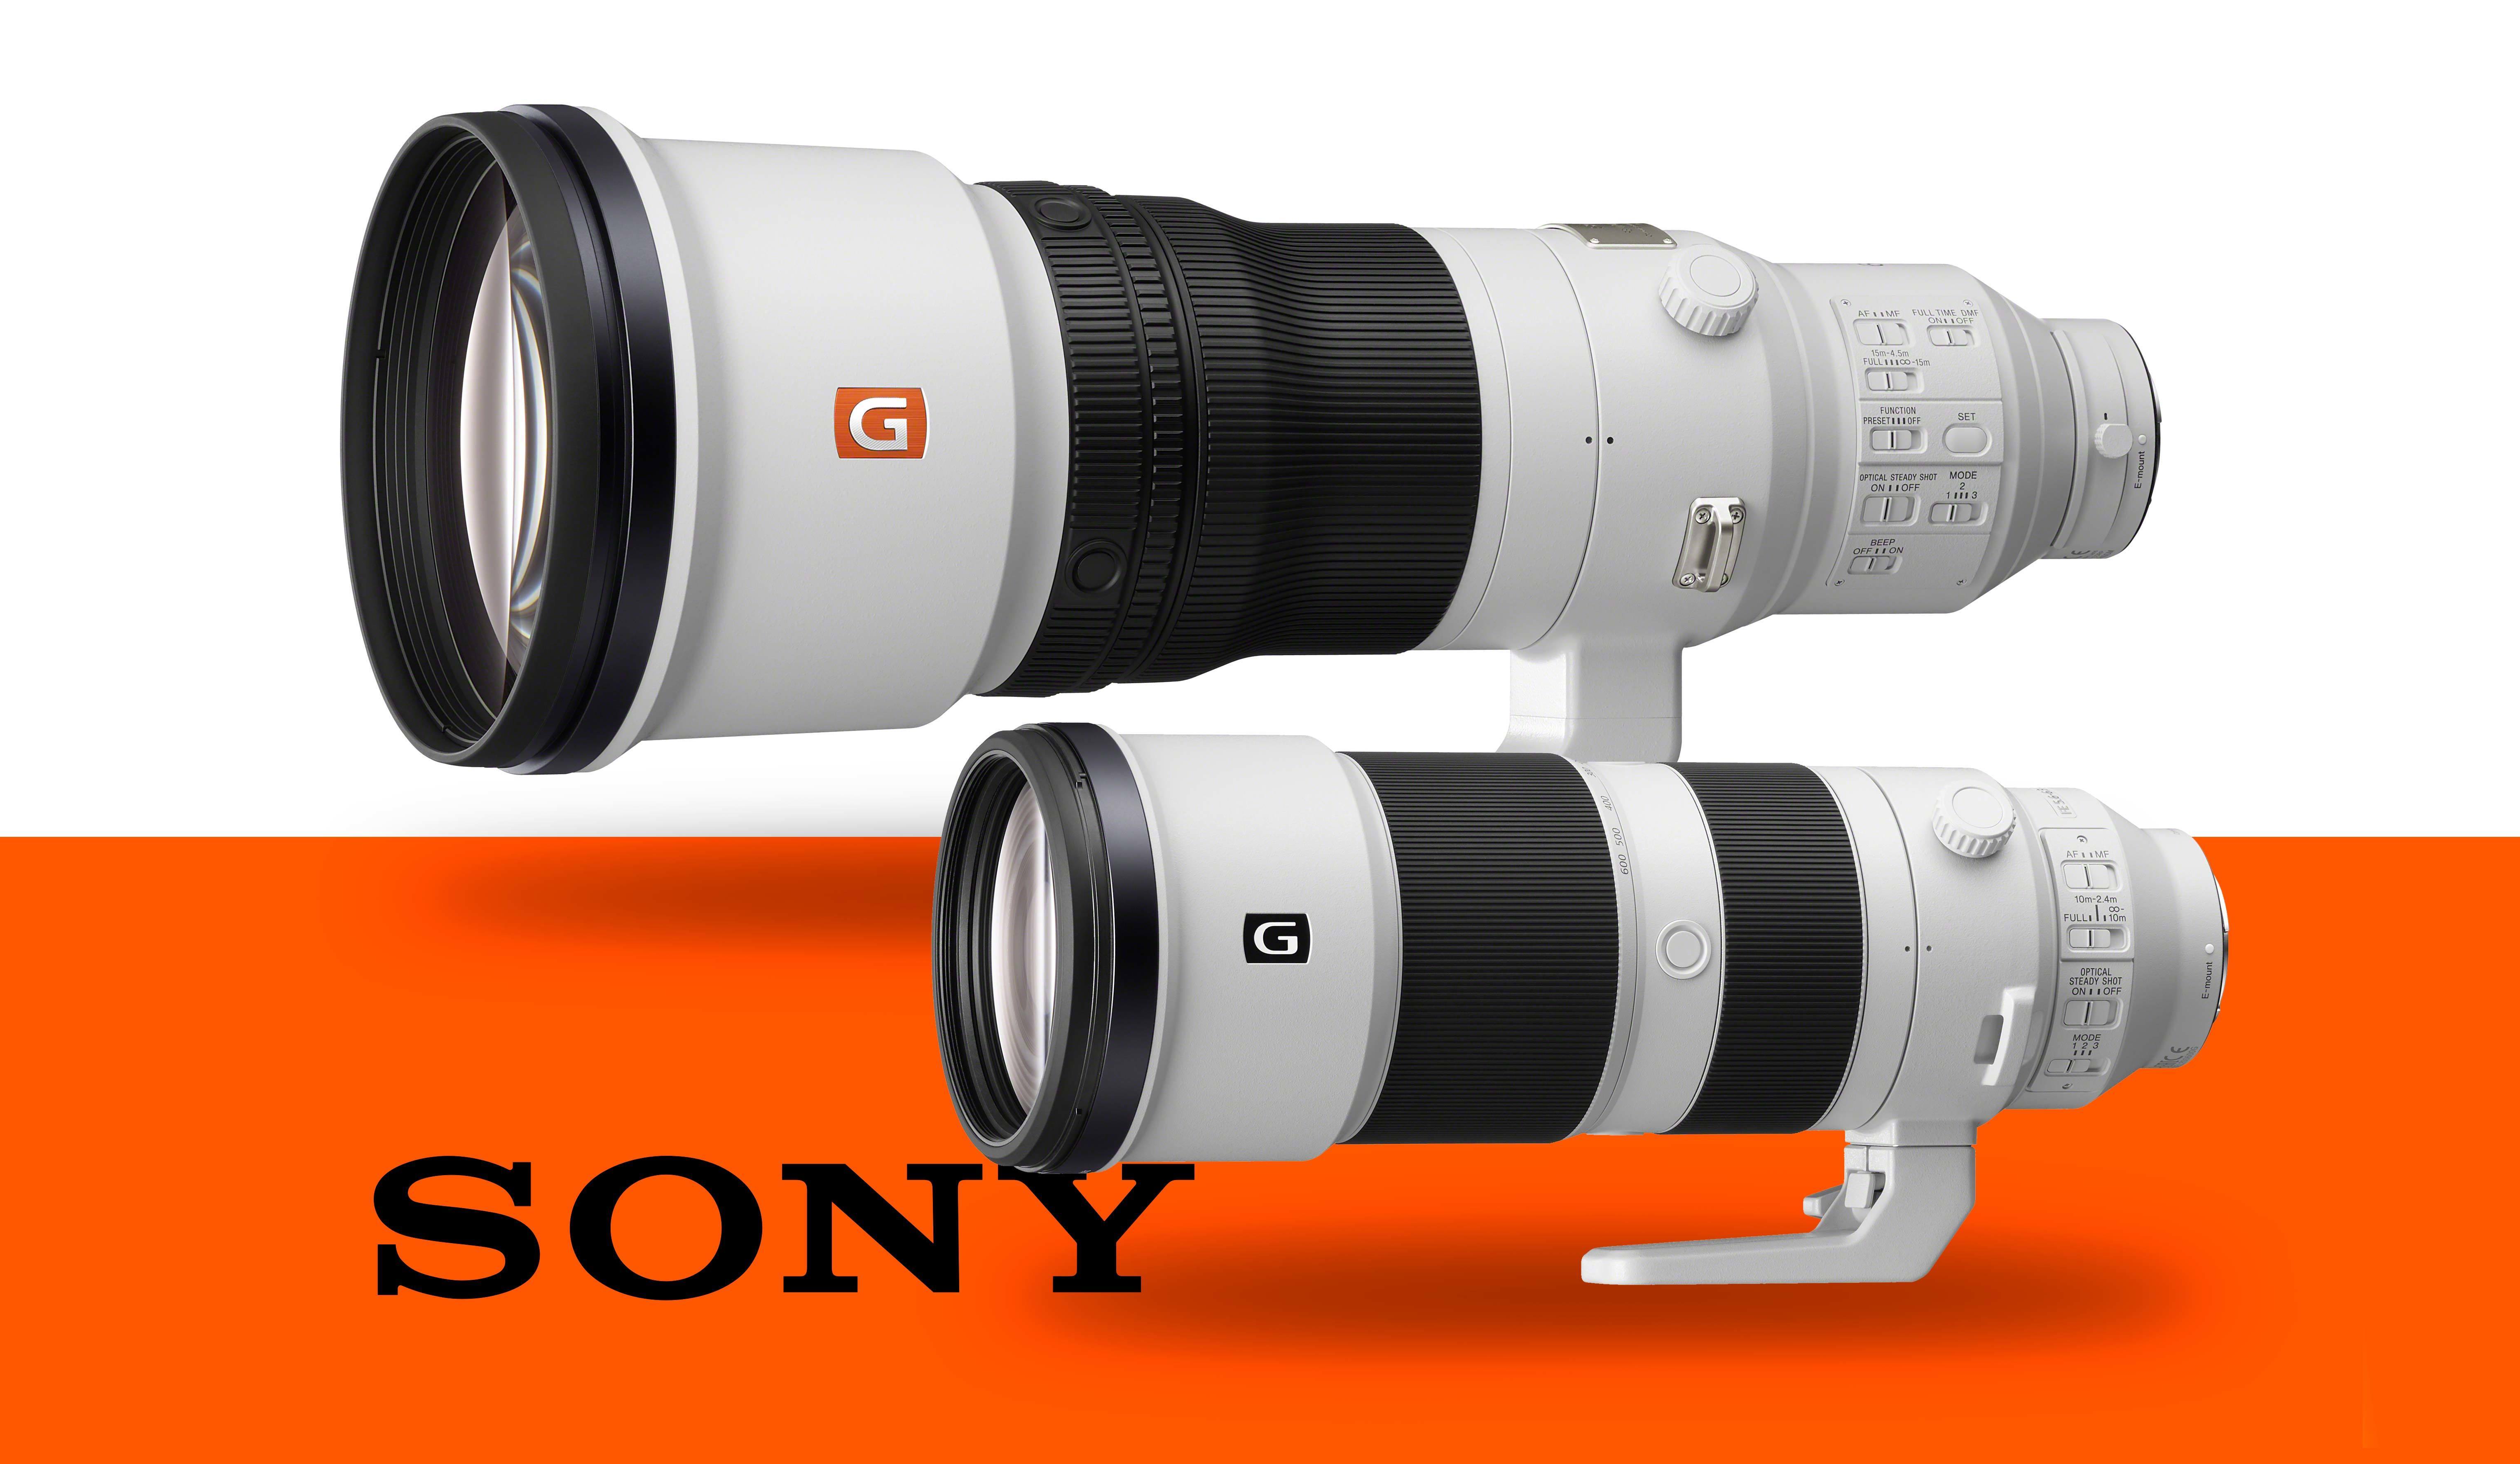 Product Image of Sony 600mm f/4 OSS lens and Sony 200-600mm lens